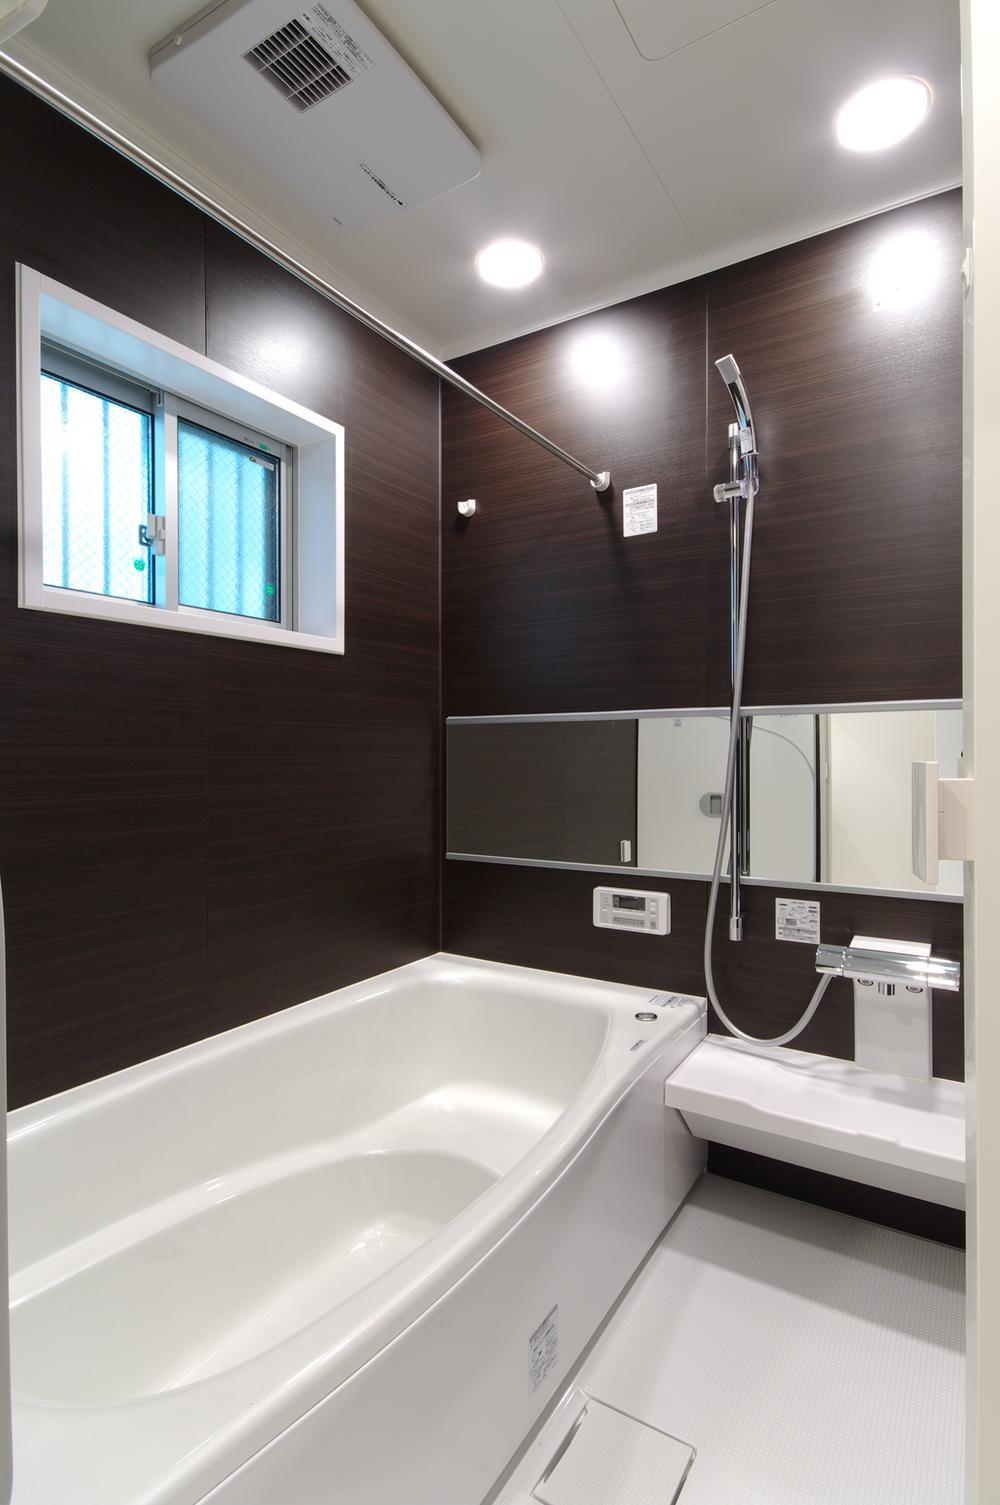 Same specifications photo (bathroom). Same construction company equivalent specification photo